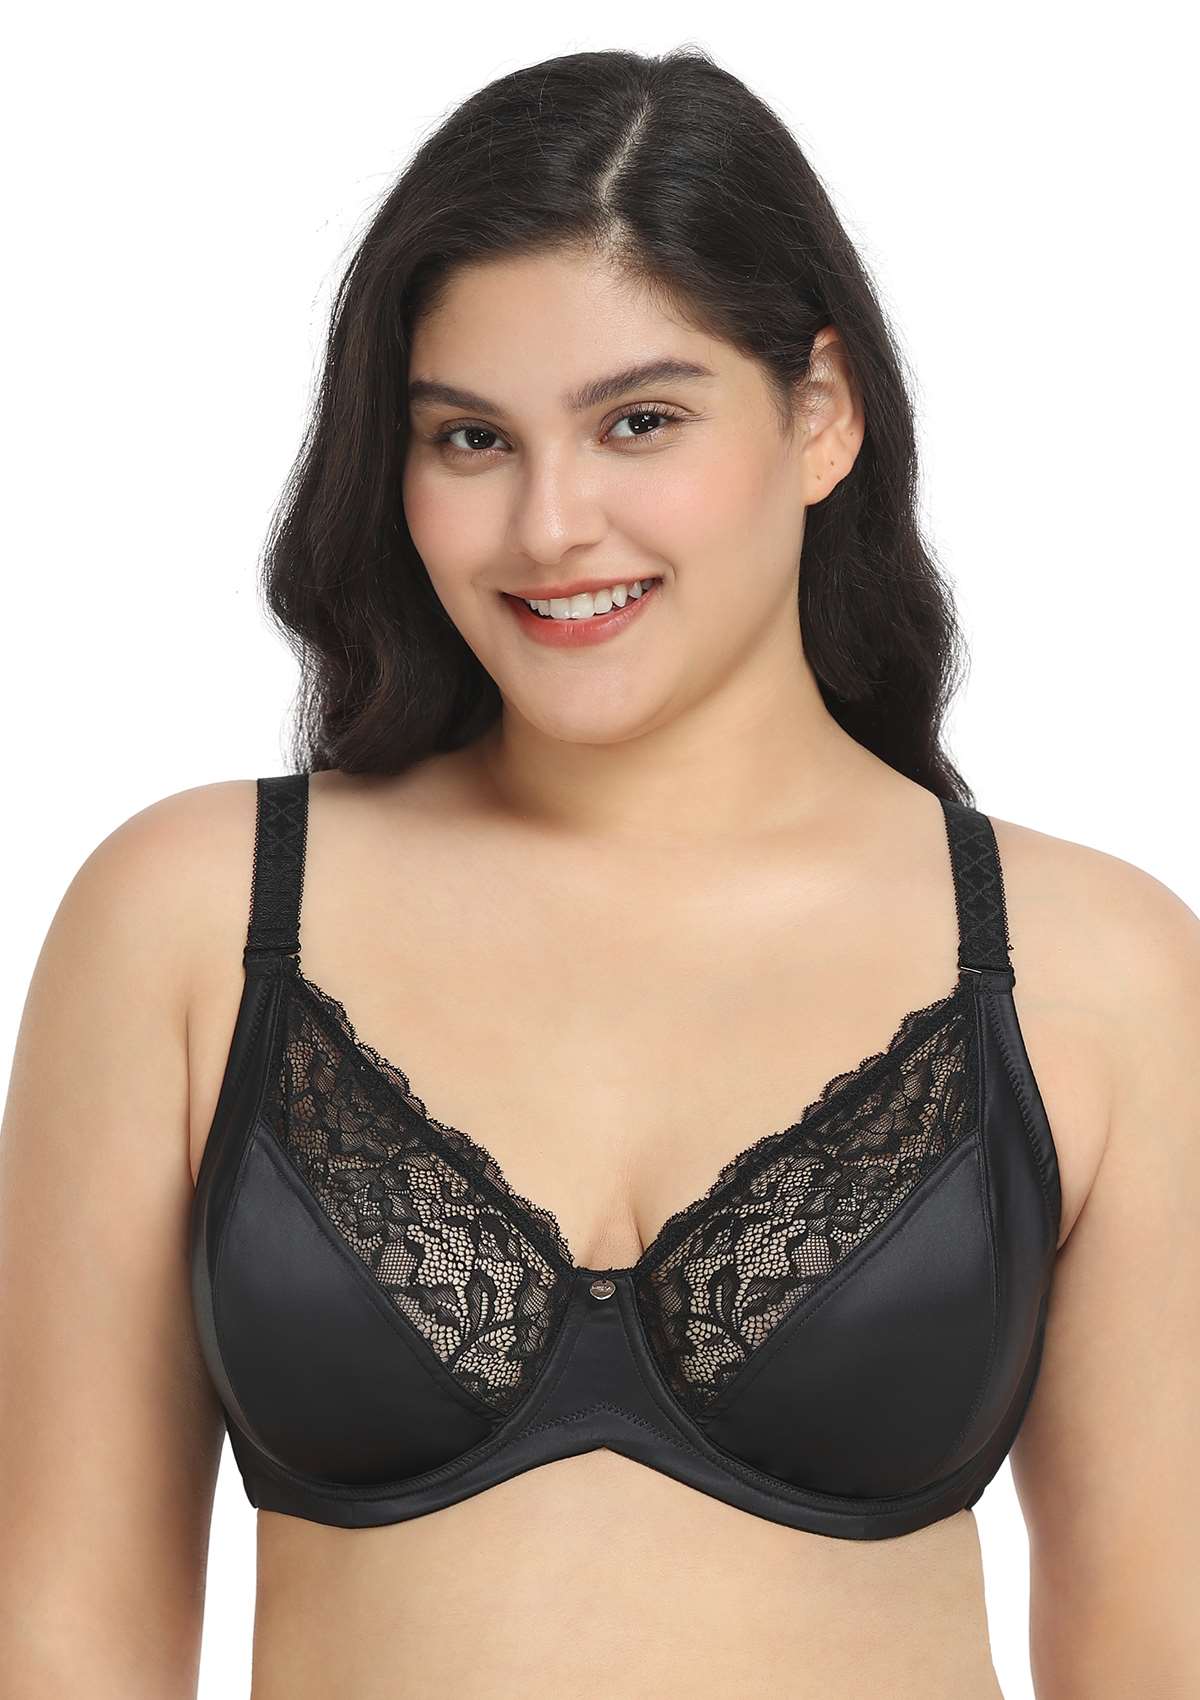 HSIA Foxy Satin Silky Full Coverage Underwire Bra With Floral Lace Trim - Black / 40 / G